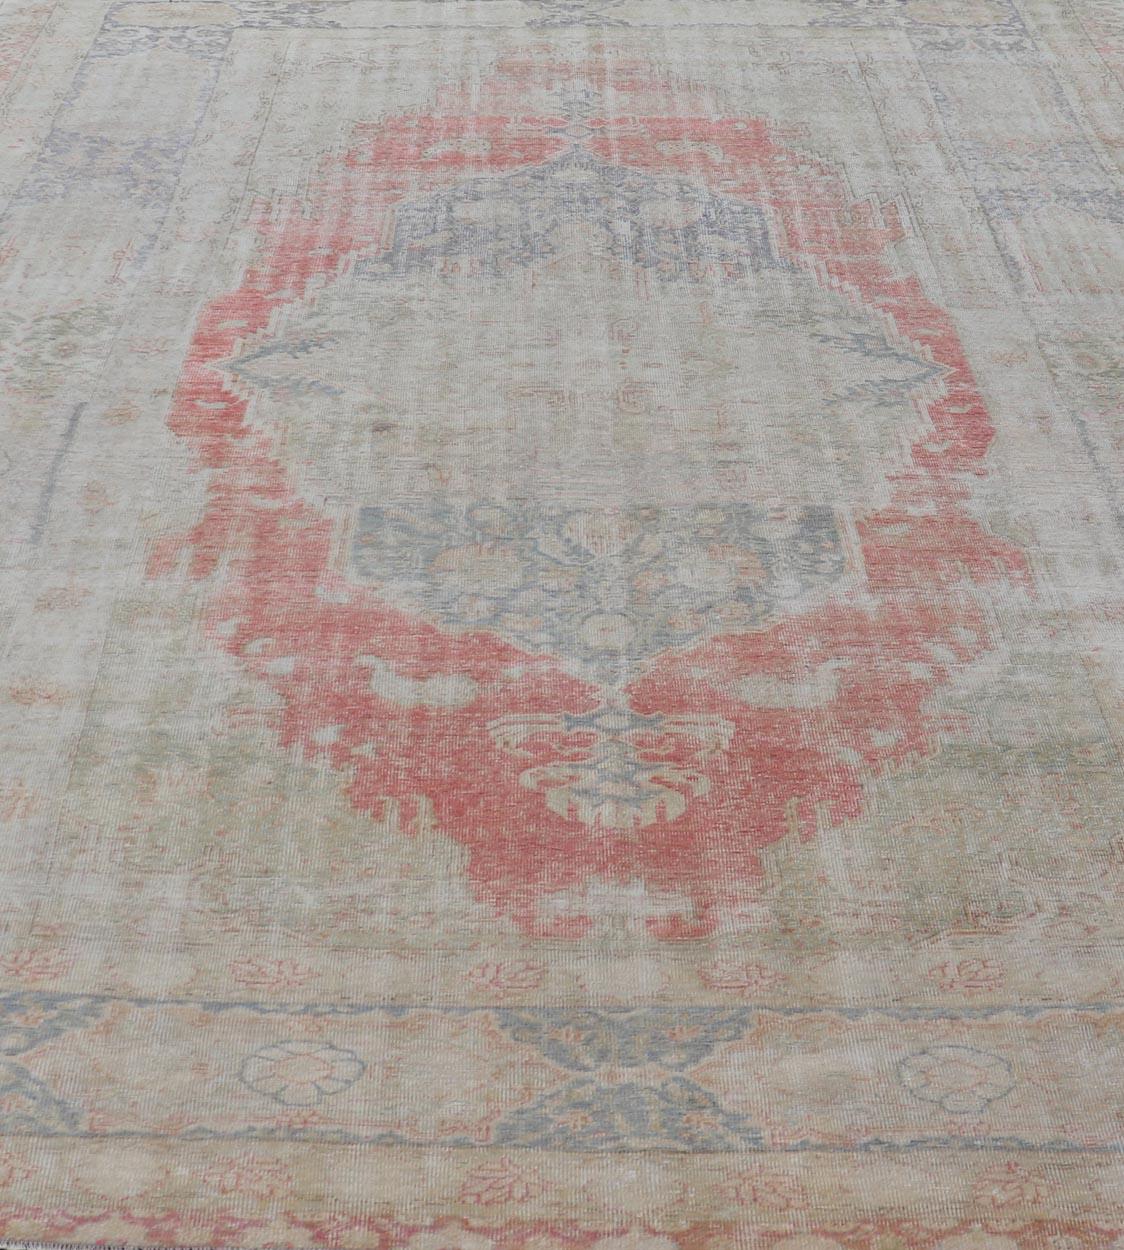 Measures: 9'7 x 13'7 
Antique Hand Knotted Turkish Oushak with Large Medallion in Off White and Coral. Keivan Woven Arts / rug EN-179974, country of origin / type: Turkey / Oushak, circa 1920. 
This large antique Turkish Oushak rug bears a off white